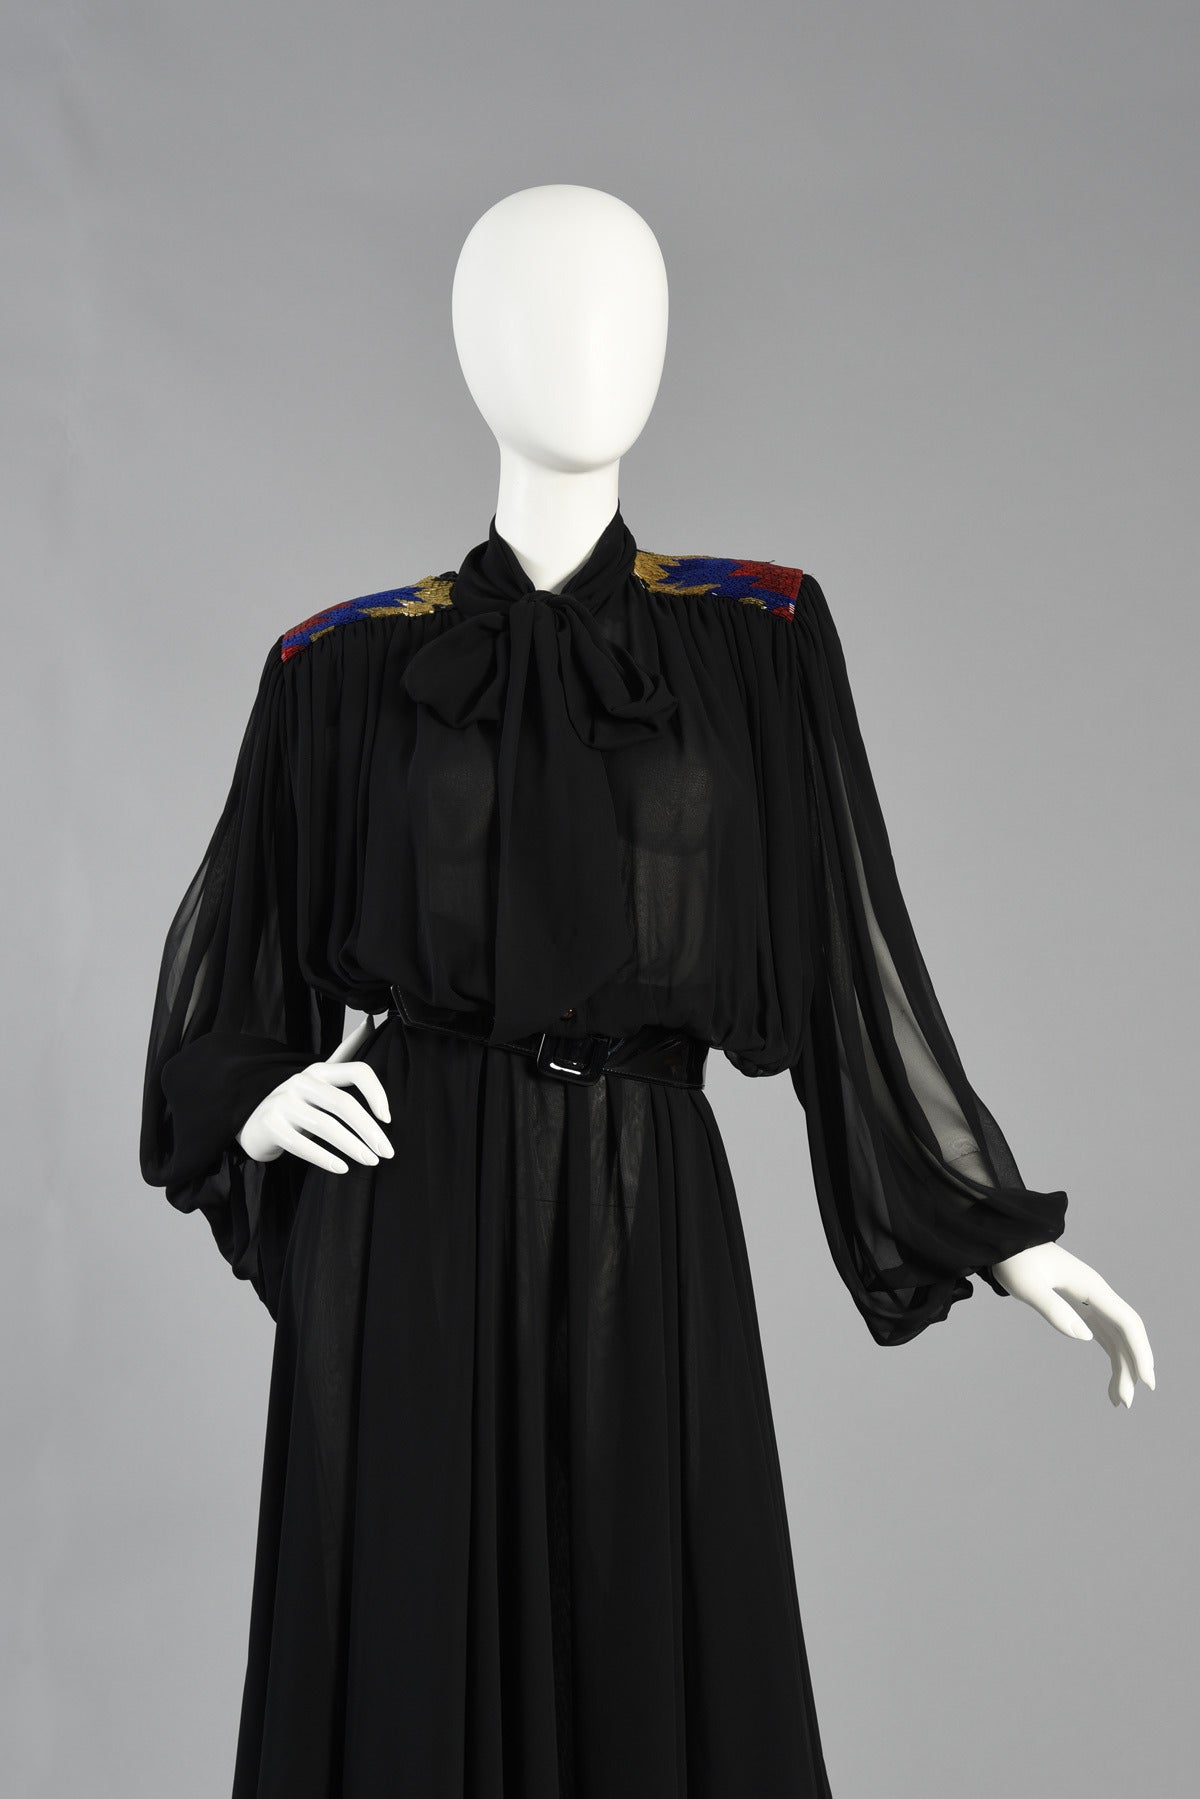 Stunning Wayne Clark Silk Dress with Beaded Details and Blouson Sleeves For Sale 1